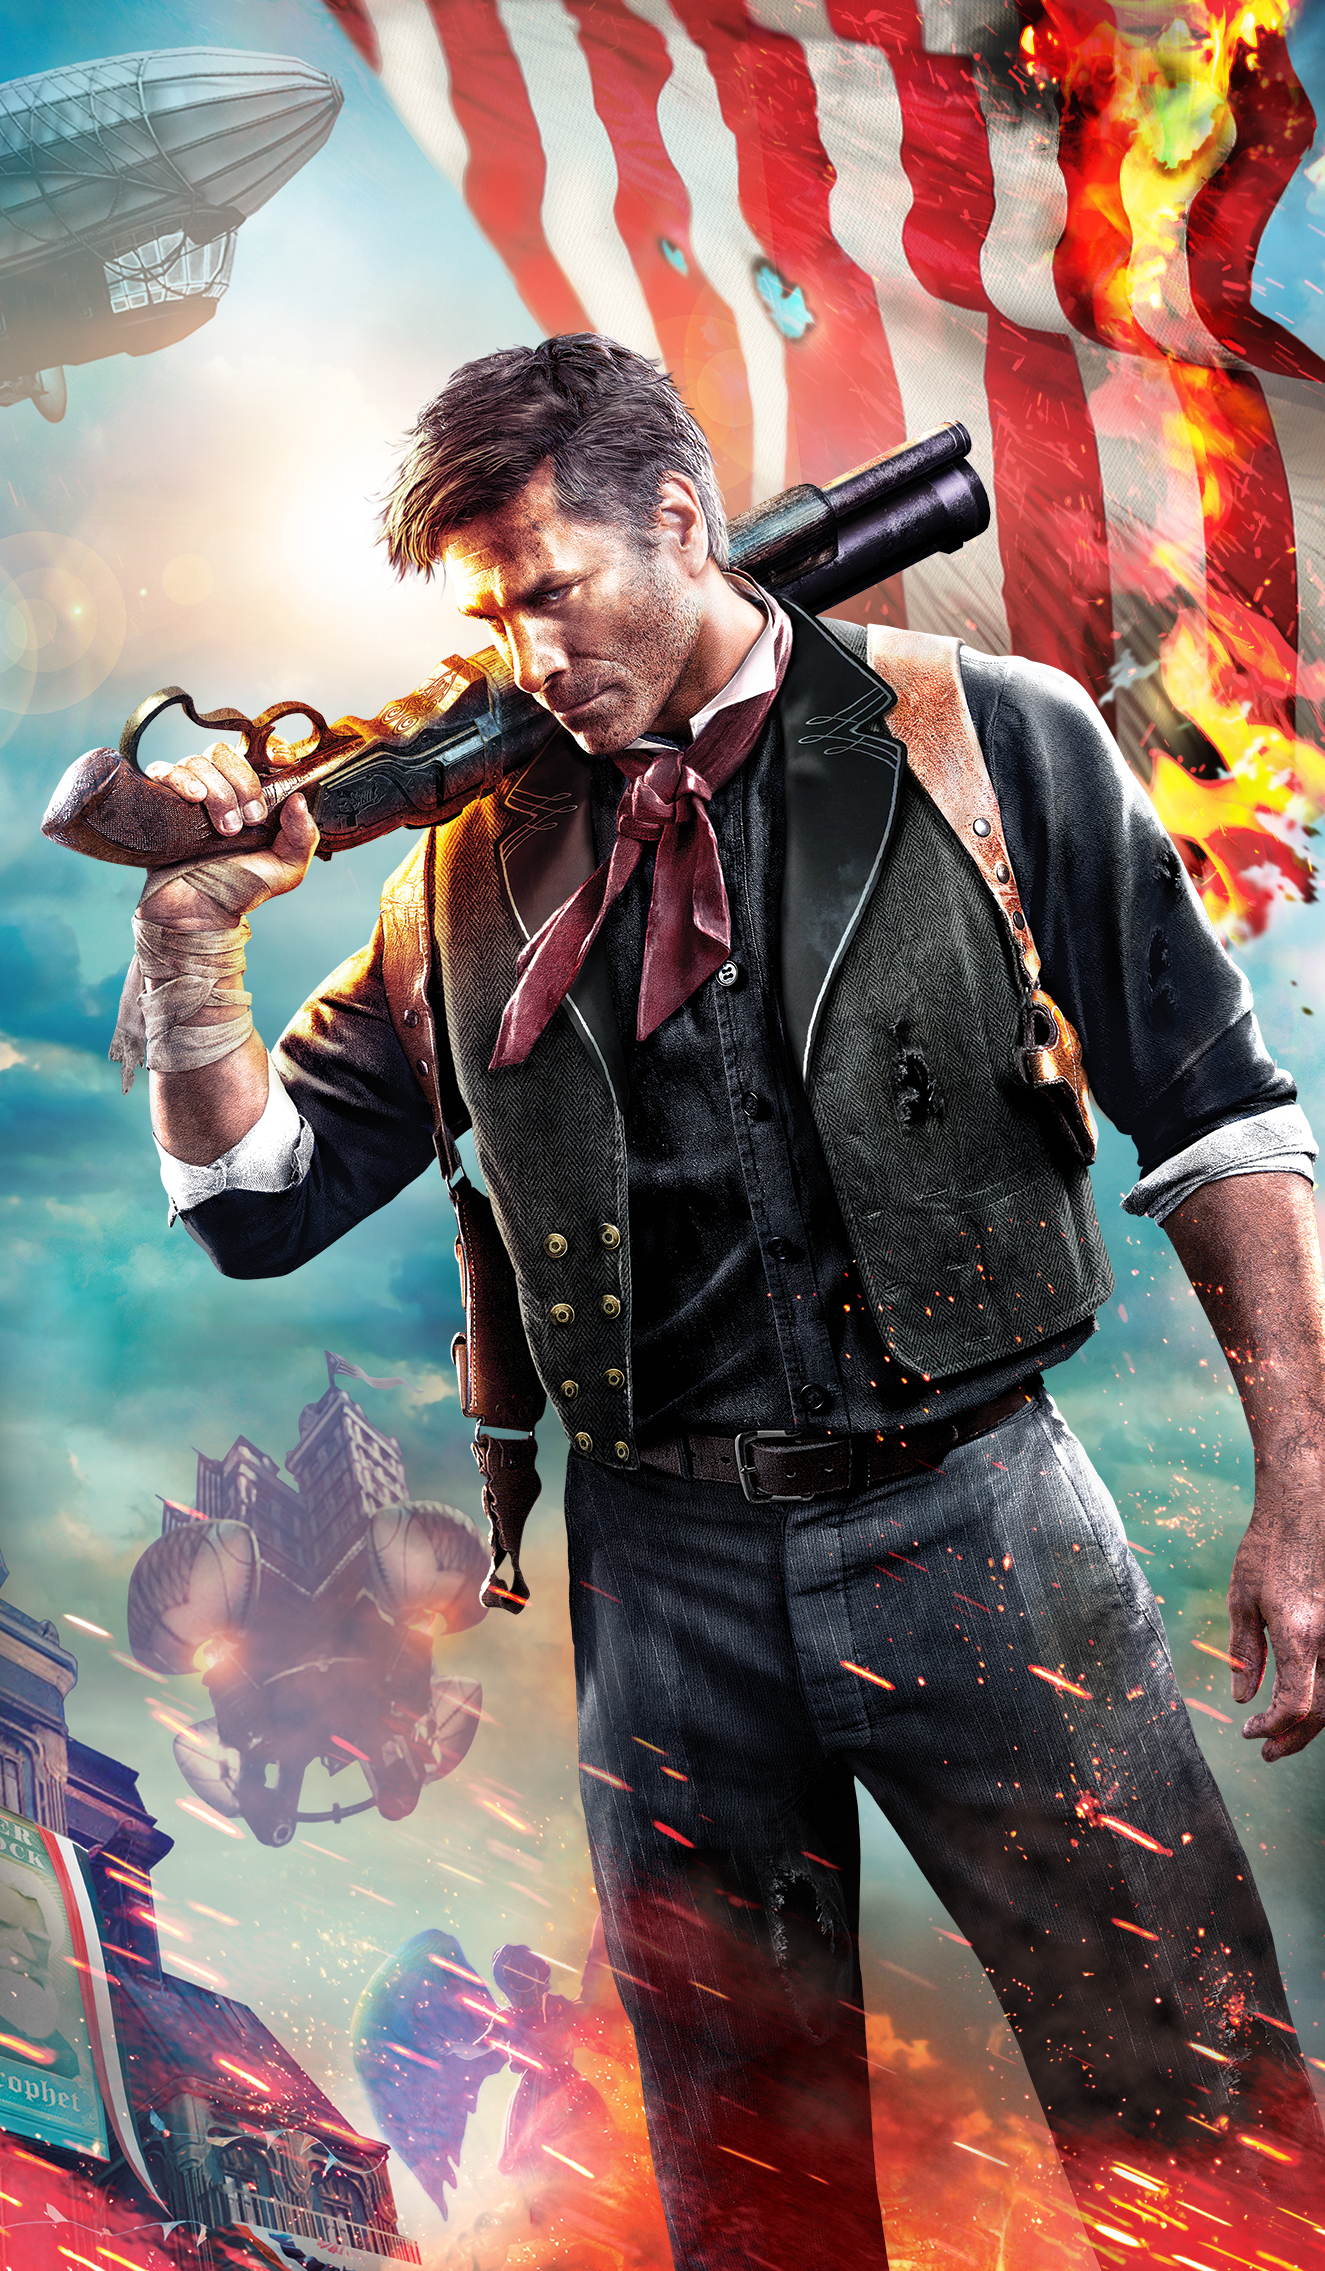 BioShock Infinite creator hires fan to officially play character